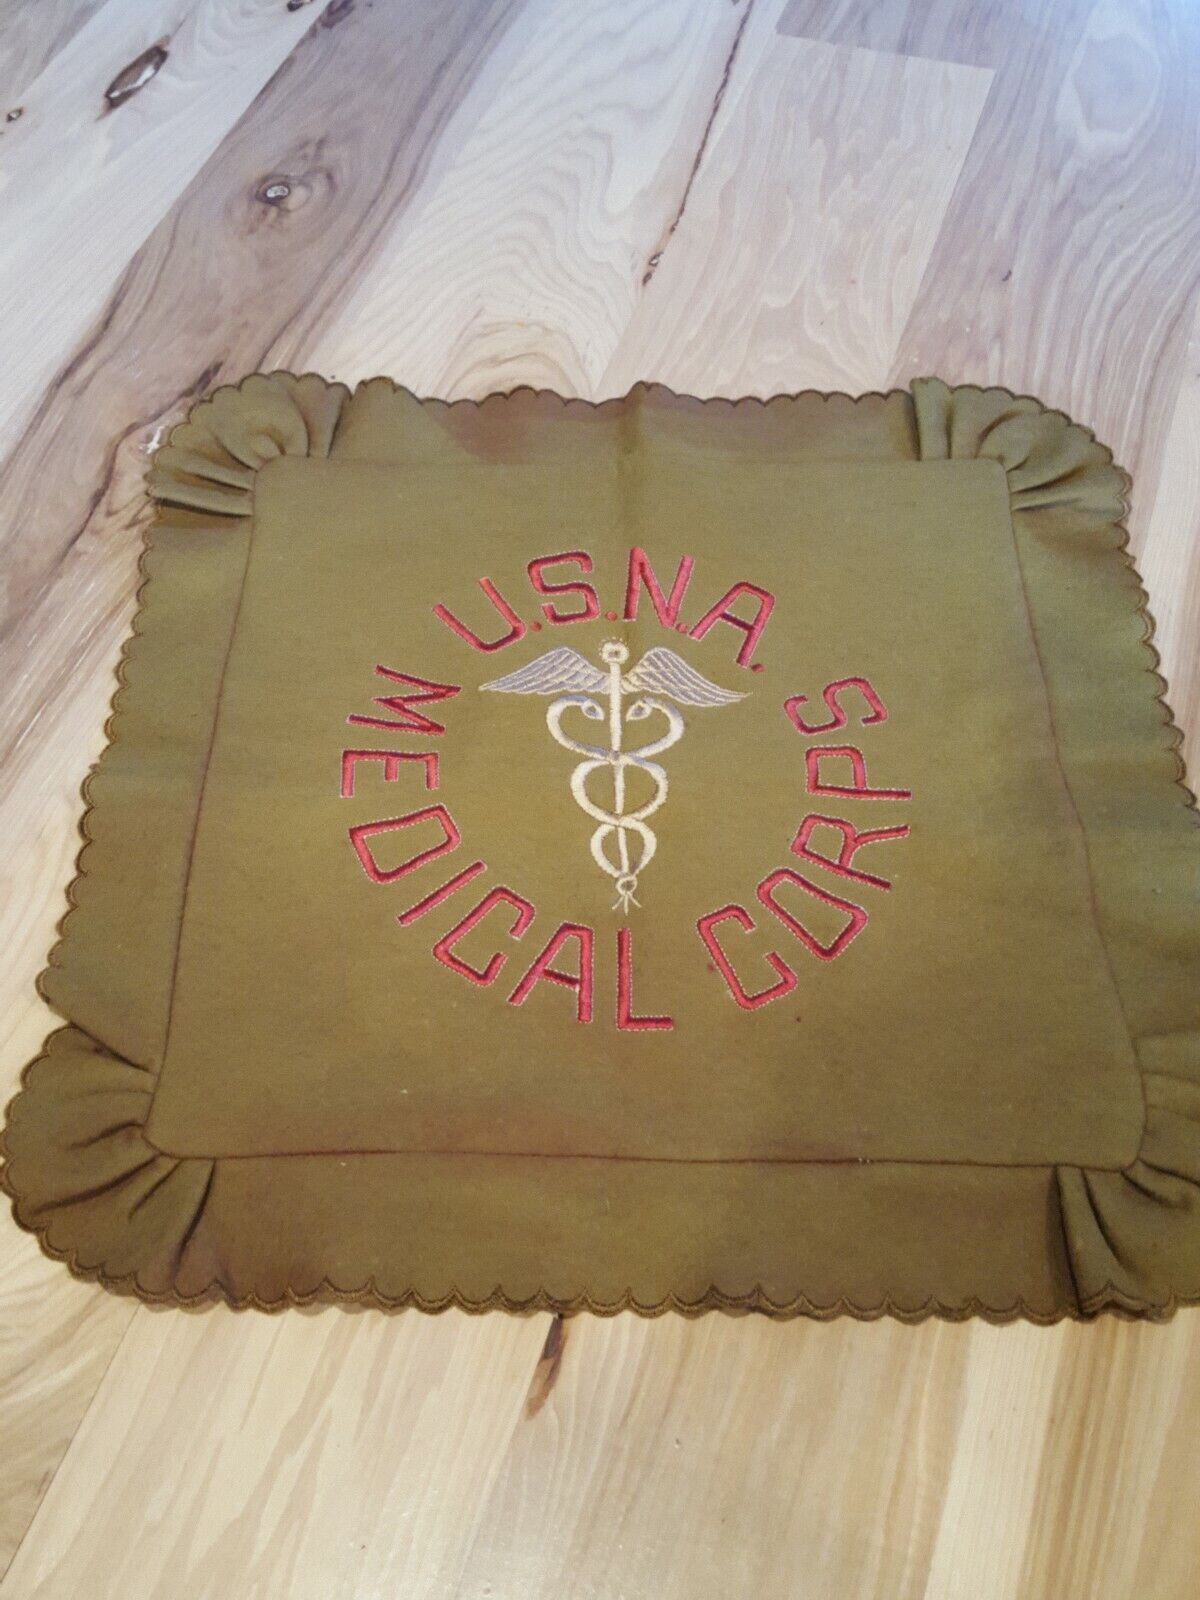 Vintage USNA Medical Corps Wool Pillow Cover WWll 